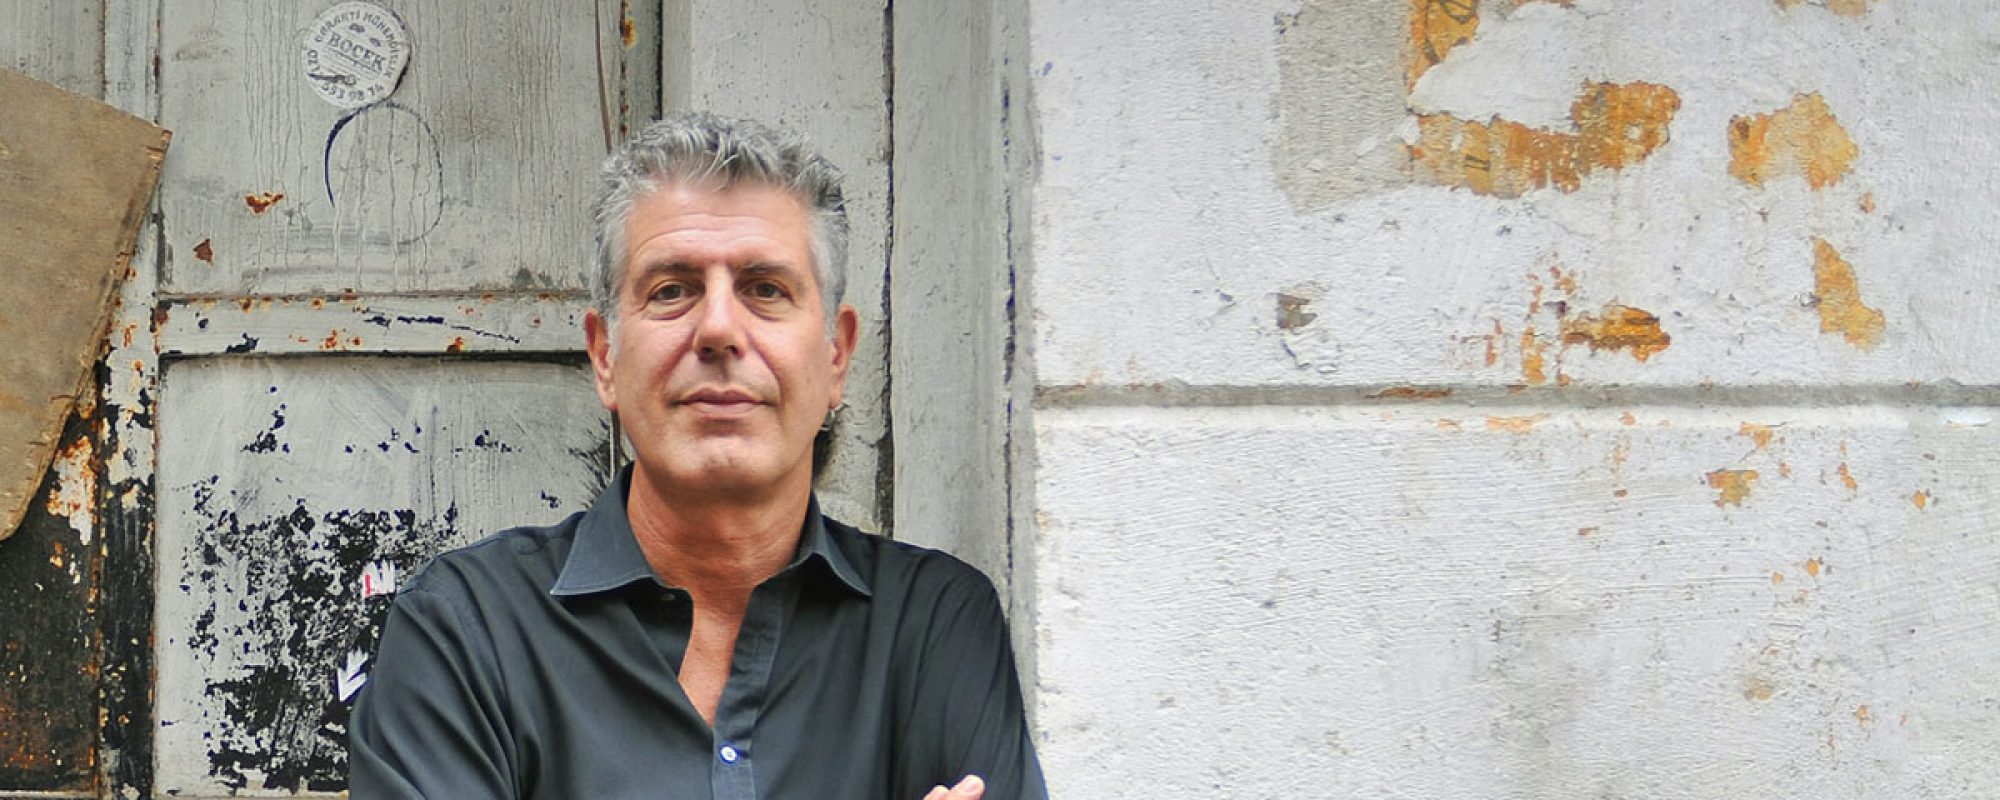 OVATION TO CELEBRATE ANTHONY BOURDAIN’S BIRTHDAY WITH PROGRAMMING BLOCK OF ANTHONY BOURDAIN: NO RESERVATIONS ON TUESDAY, JUNE 25